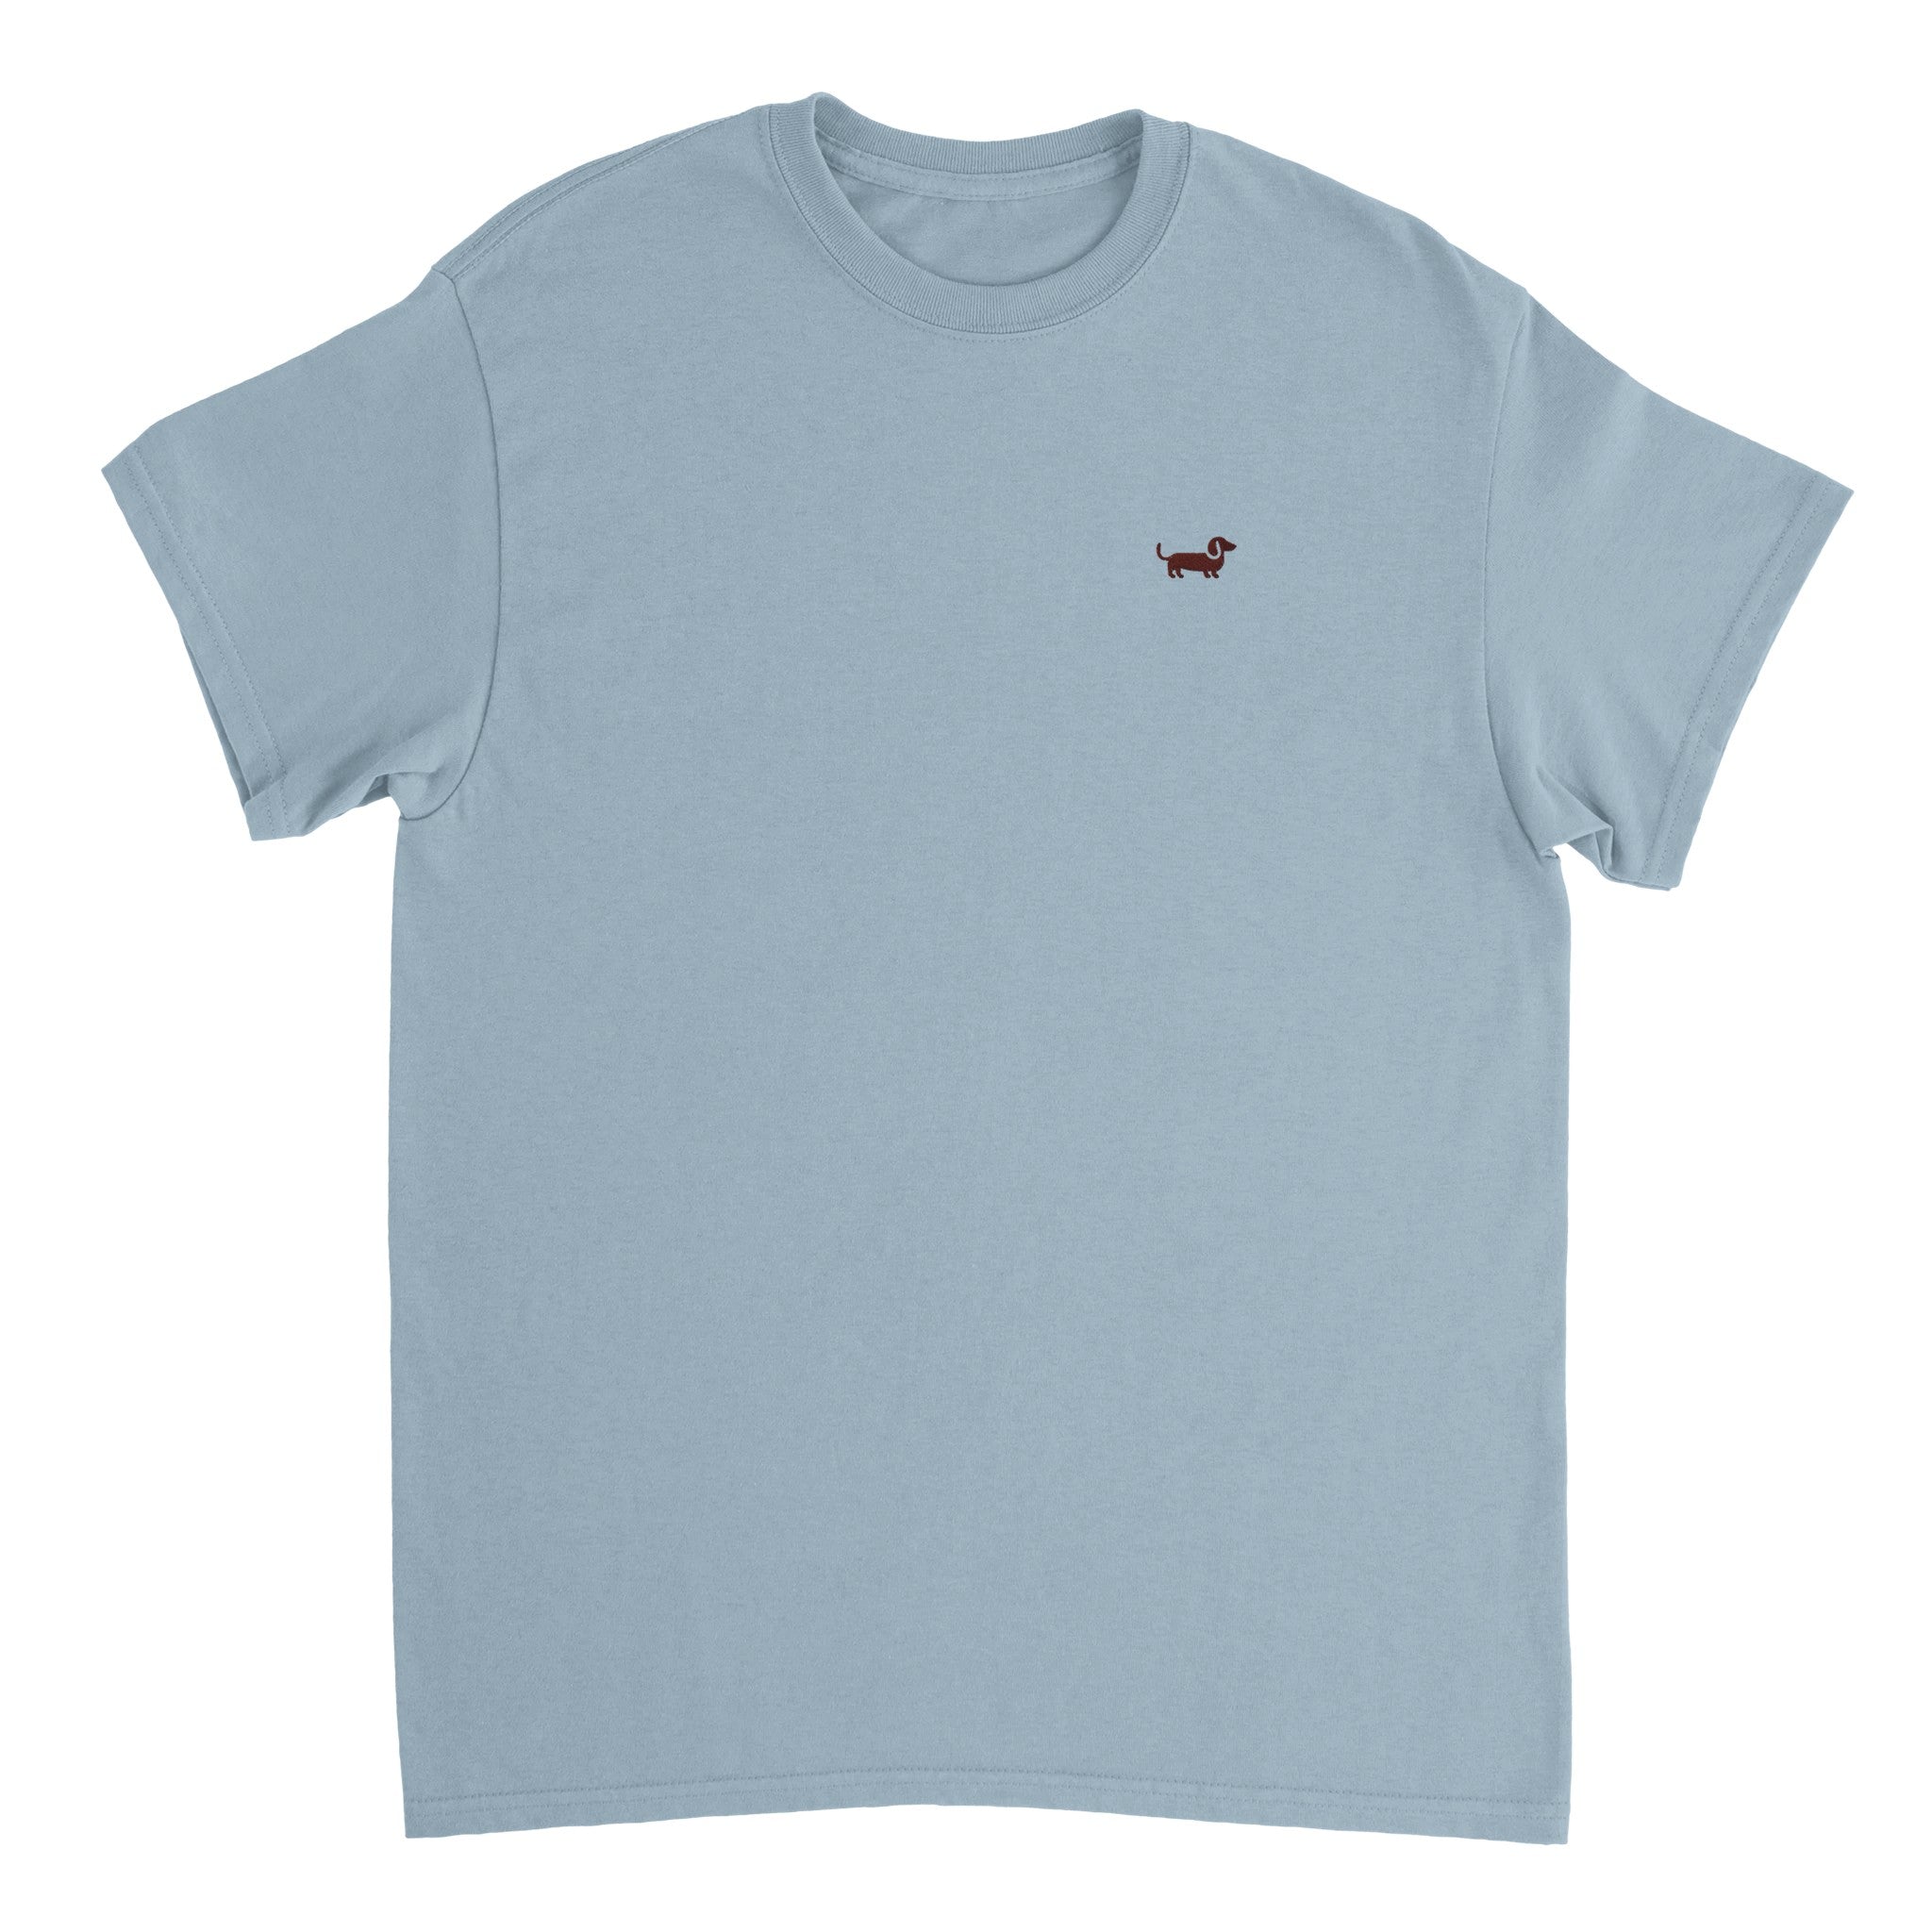 Dachshund Embroidery T-Shirt - Heavyweight Unisex Patchicon Essential